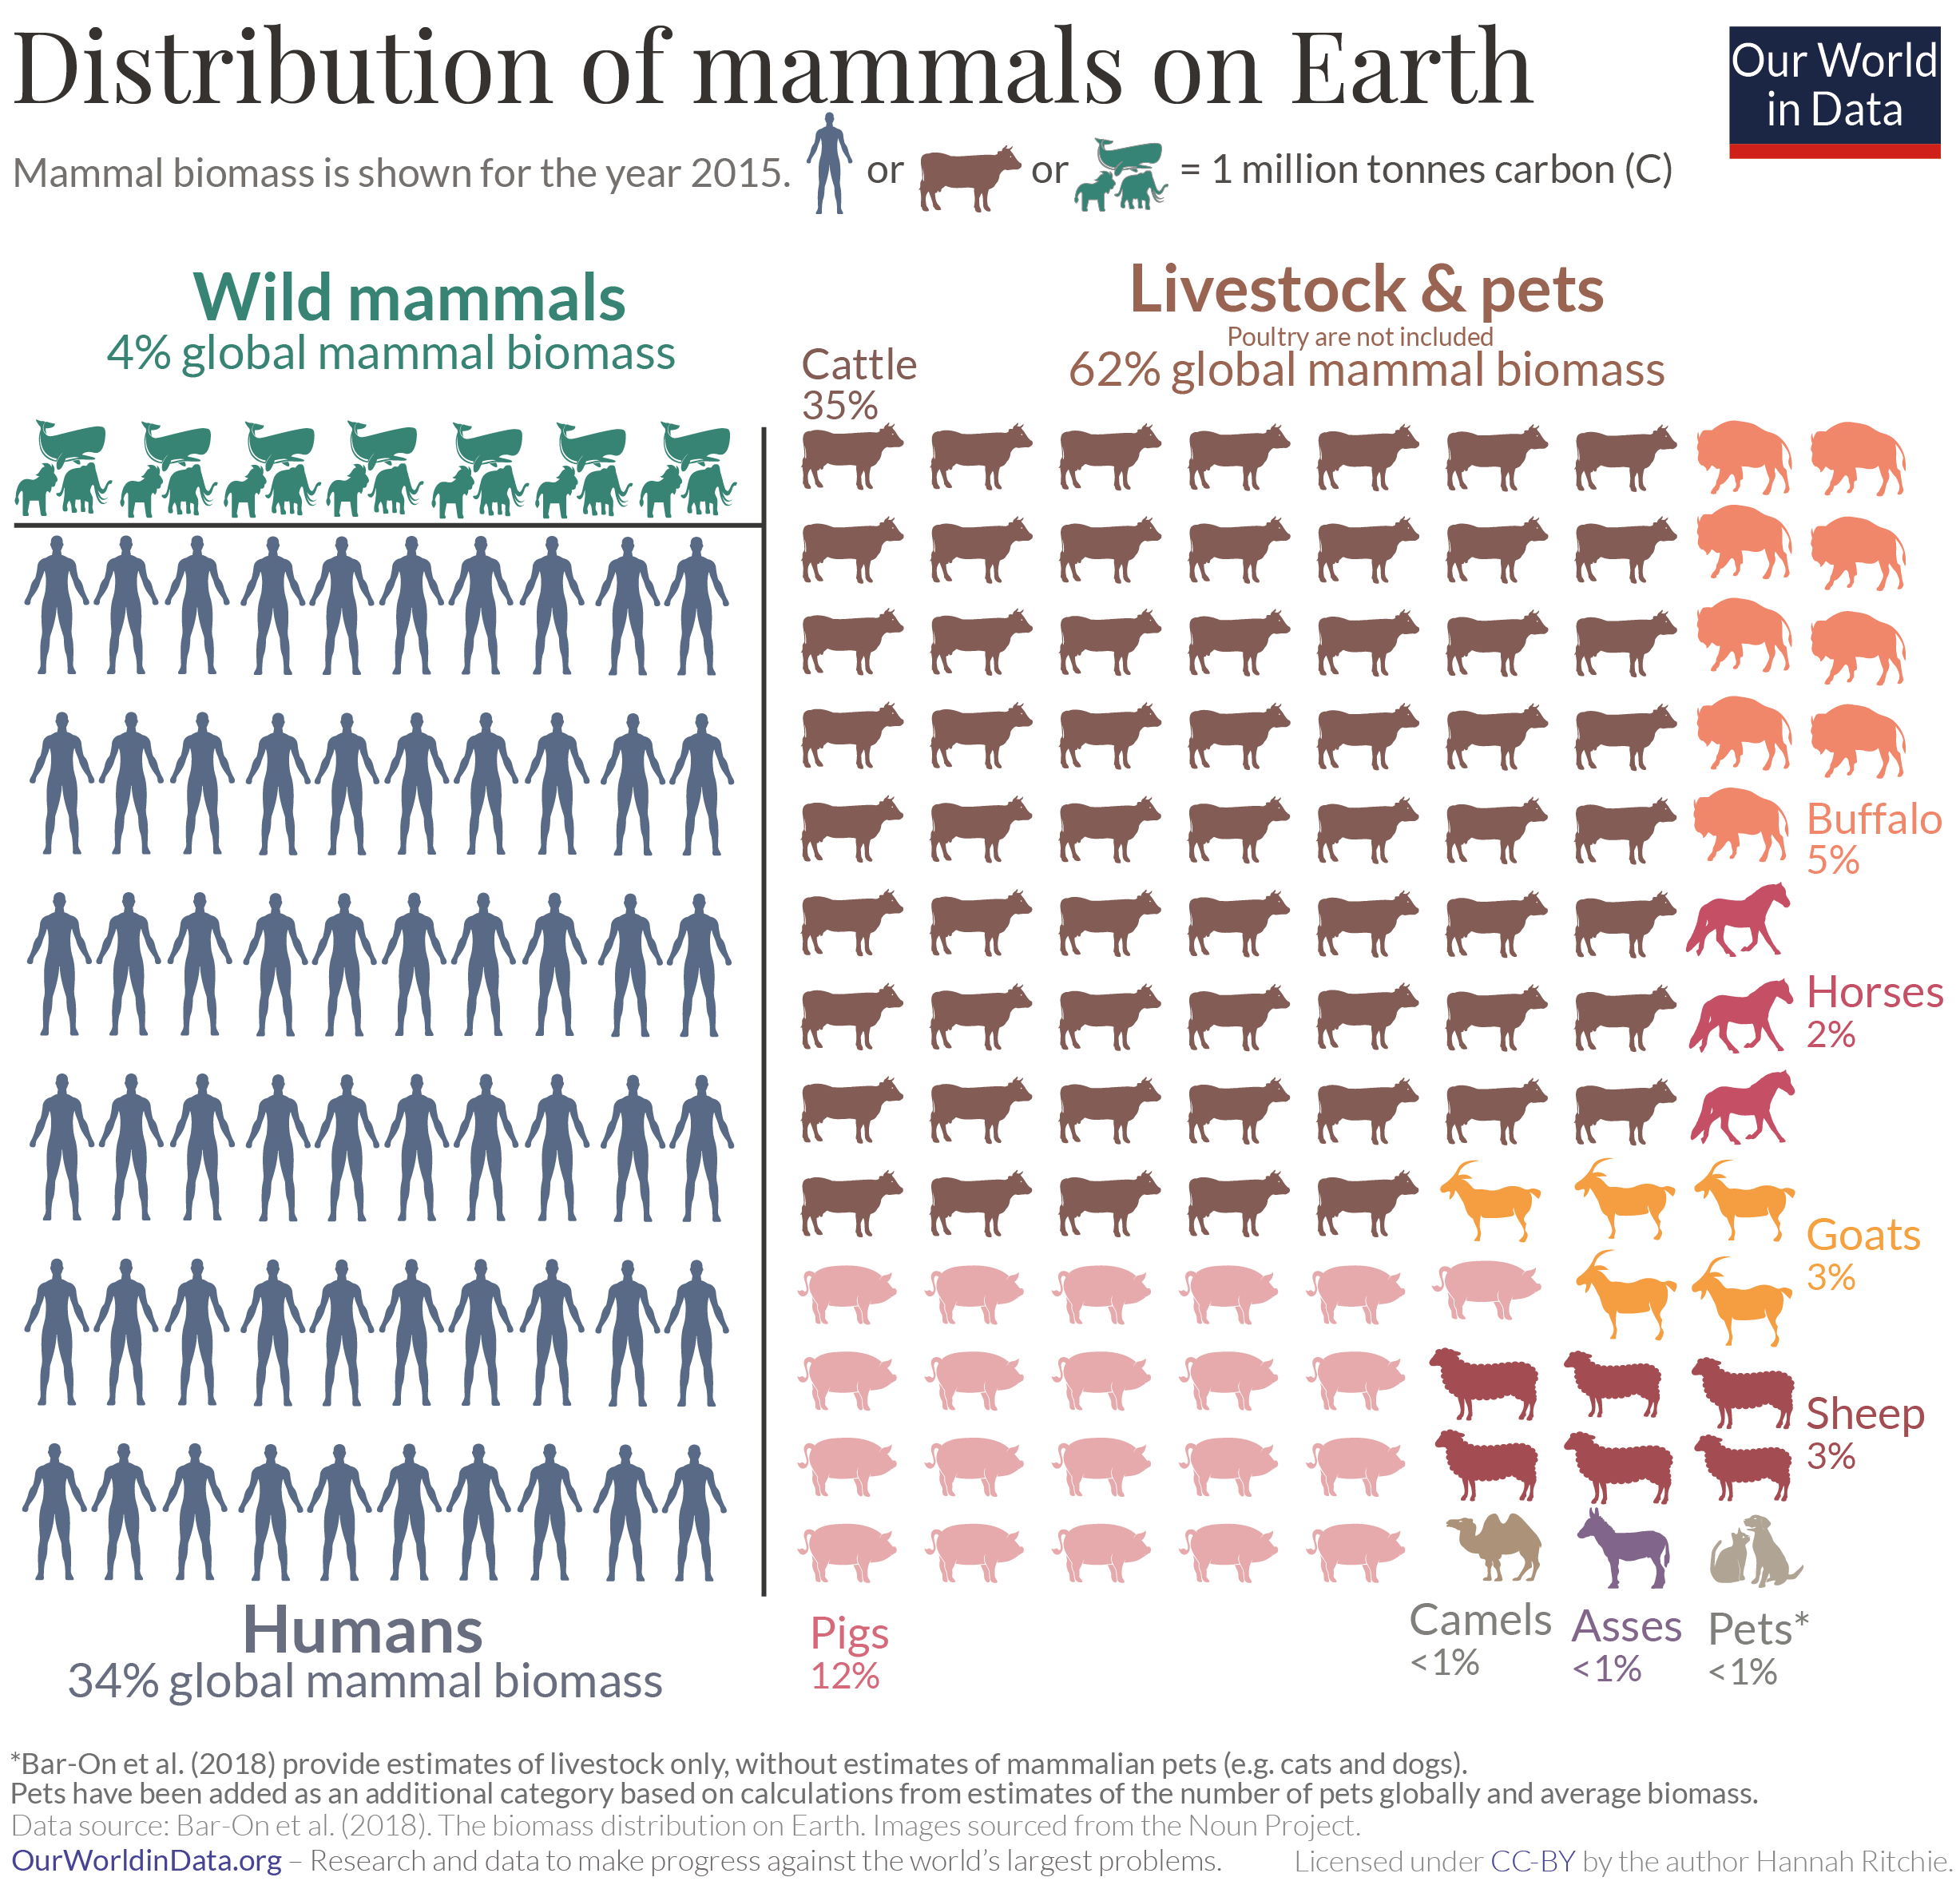 How many species of mammals are there in the world 2020?